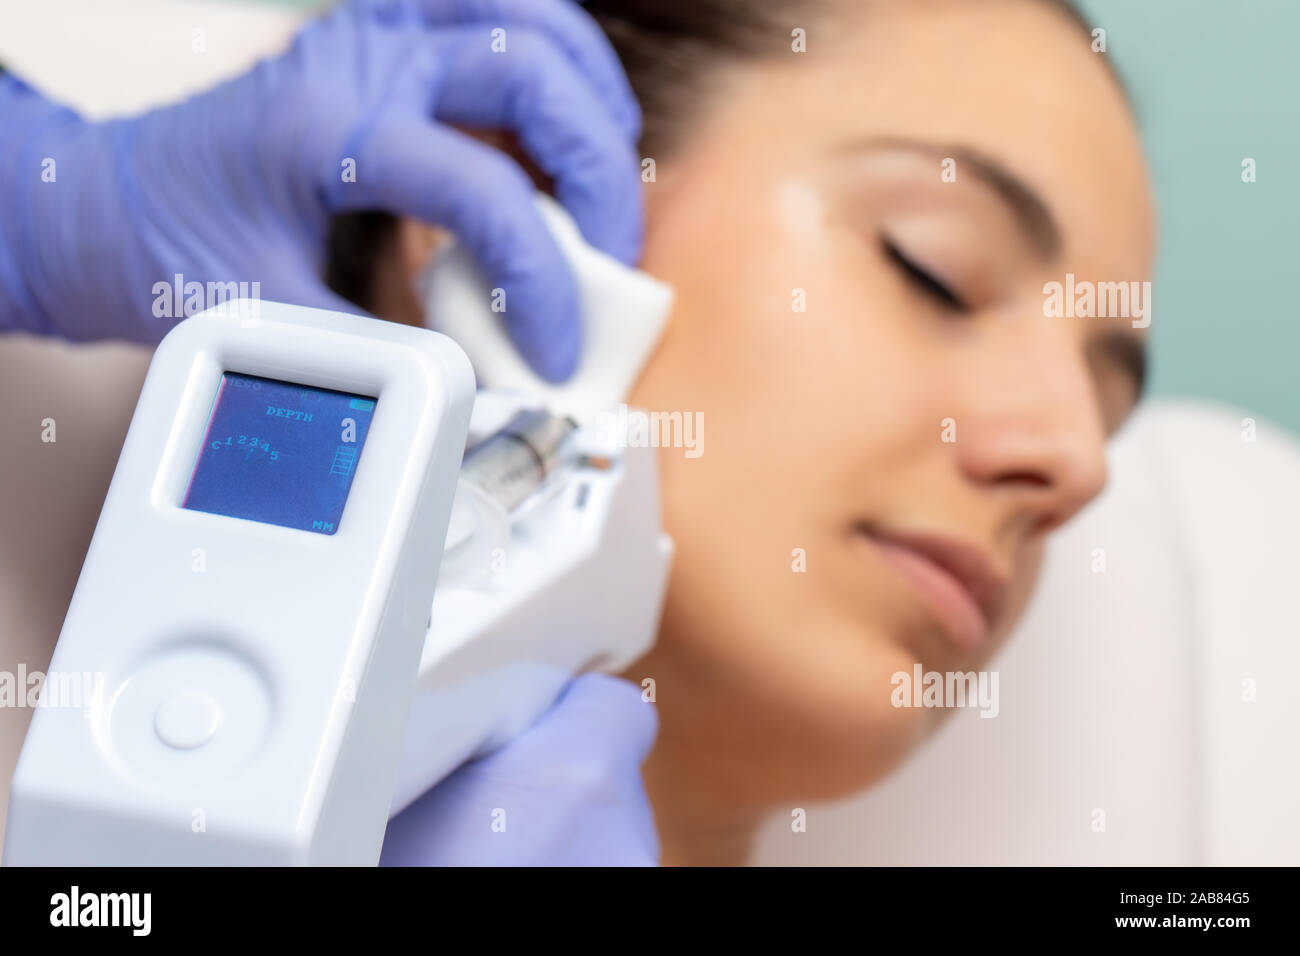 Micro needling technology used on young woman. Device with digital screen indicating depth applied on skin. Stock Photo